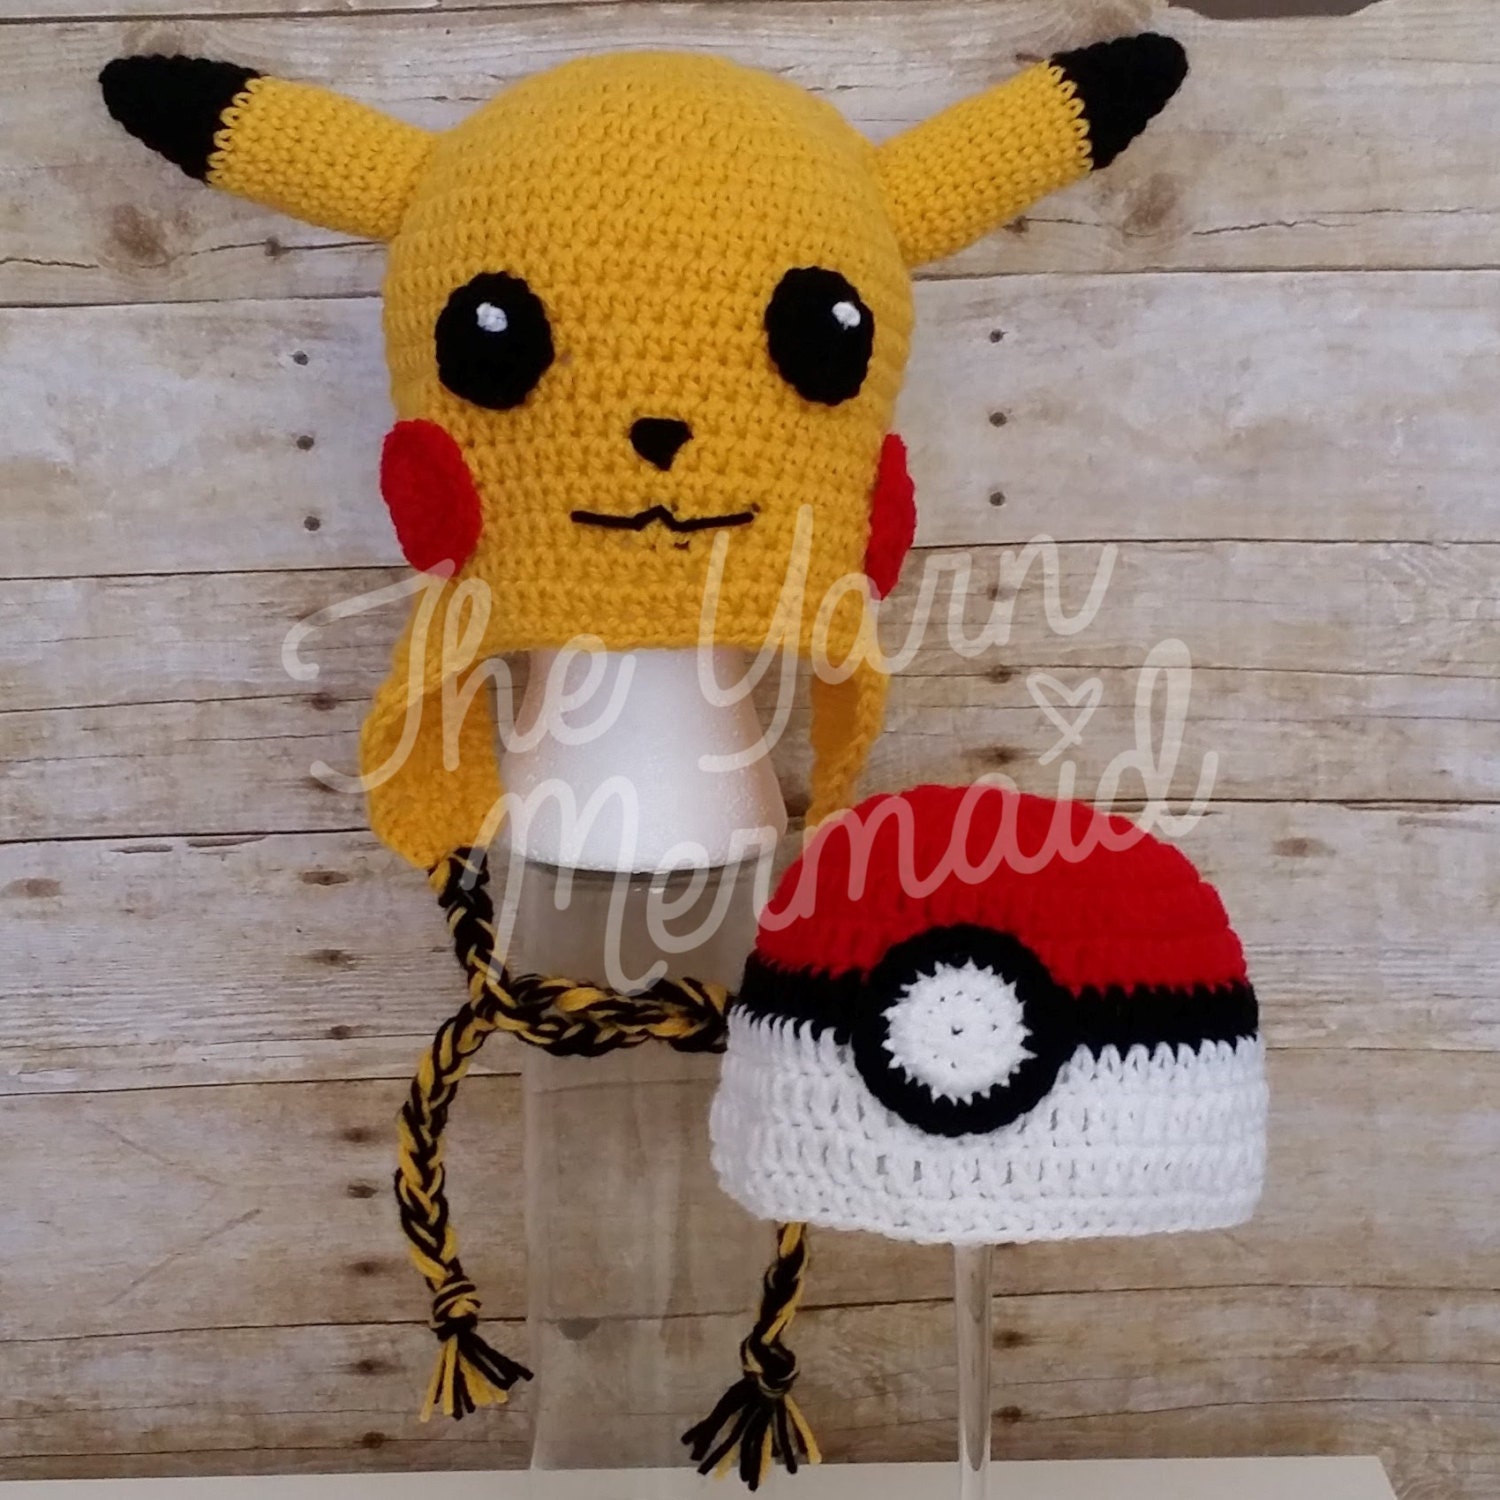 PokeMon Crochet Pikachu Kit: Kit Includes Materials to Make Pikachu and Instructions for 5 Other PokeMon [Book]